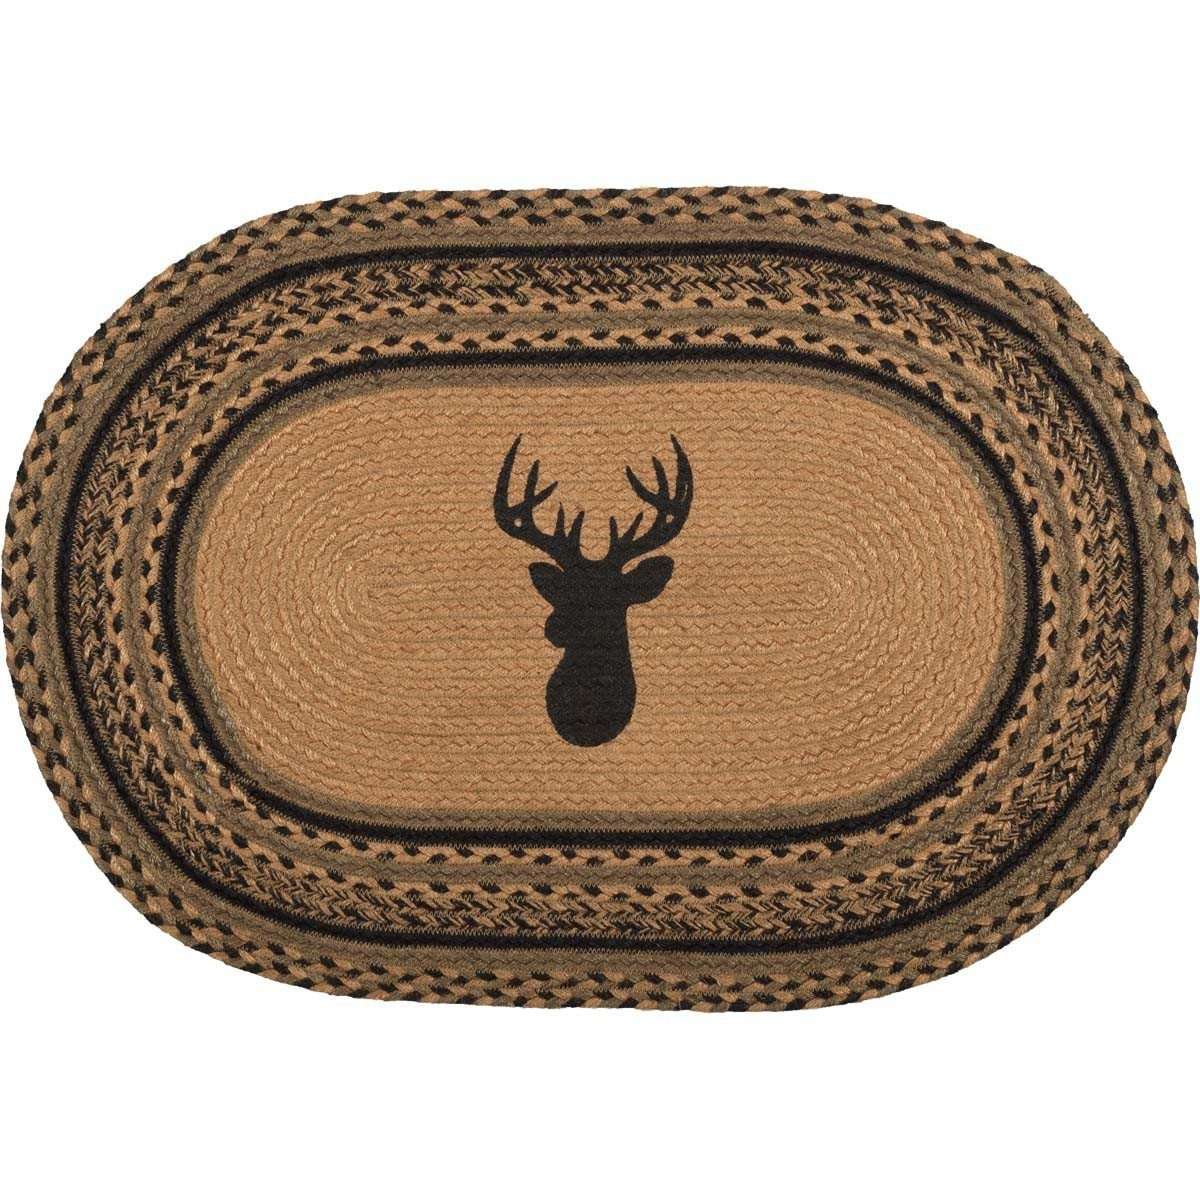 Trophy Mount Jute Braided Rug Oval rugs VHC Brands 20x30 inch 